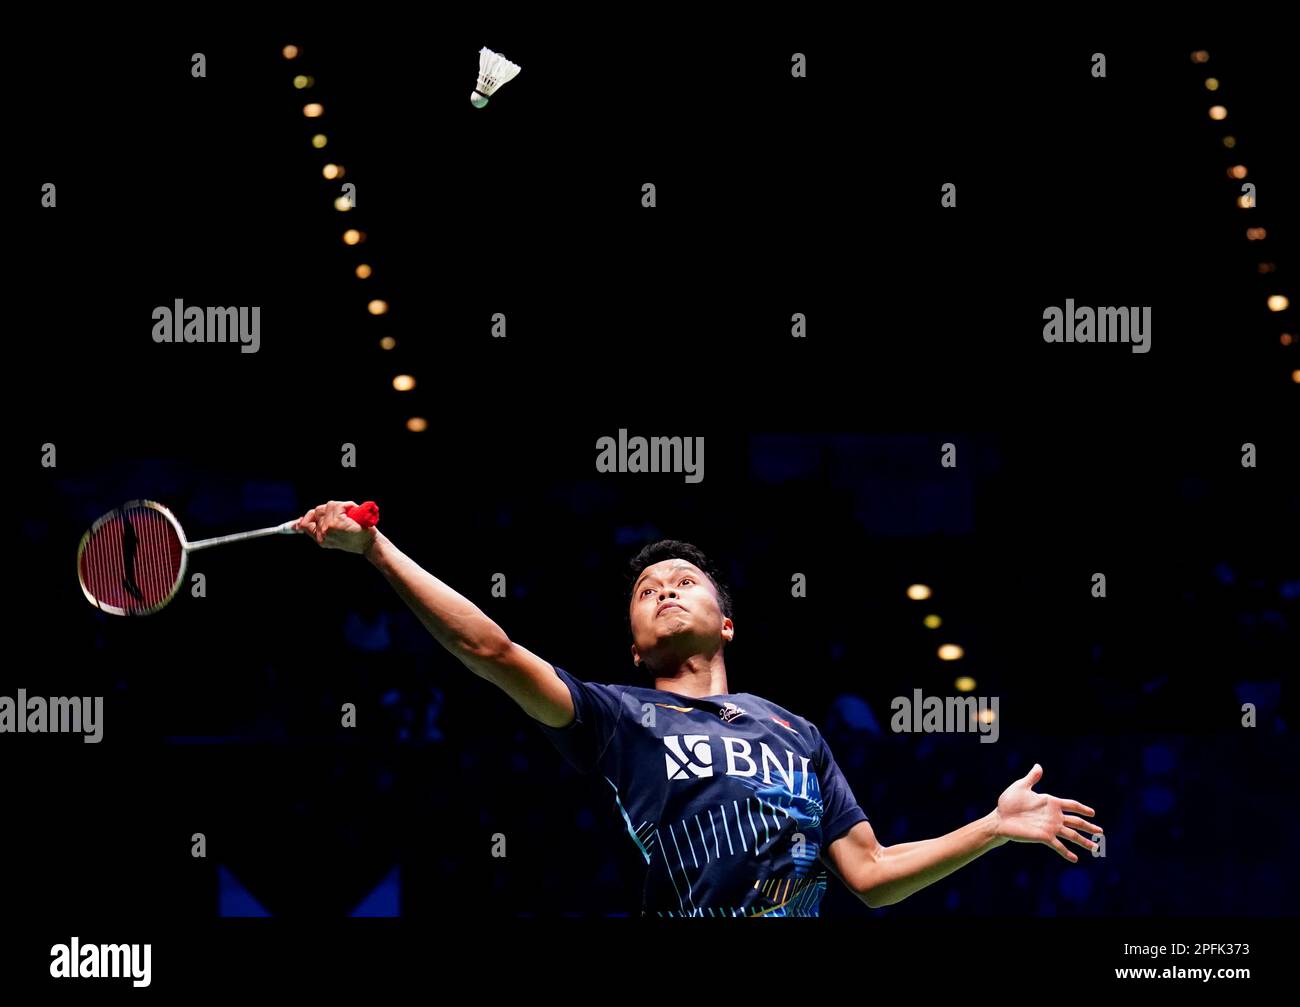 Indonesia S Anthony Sinisuka Ginting In Action Against Denmark S Anders Antonsen Not Pictured